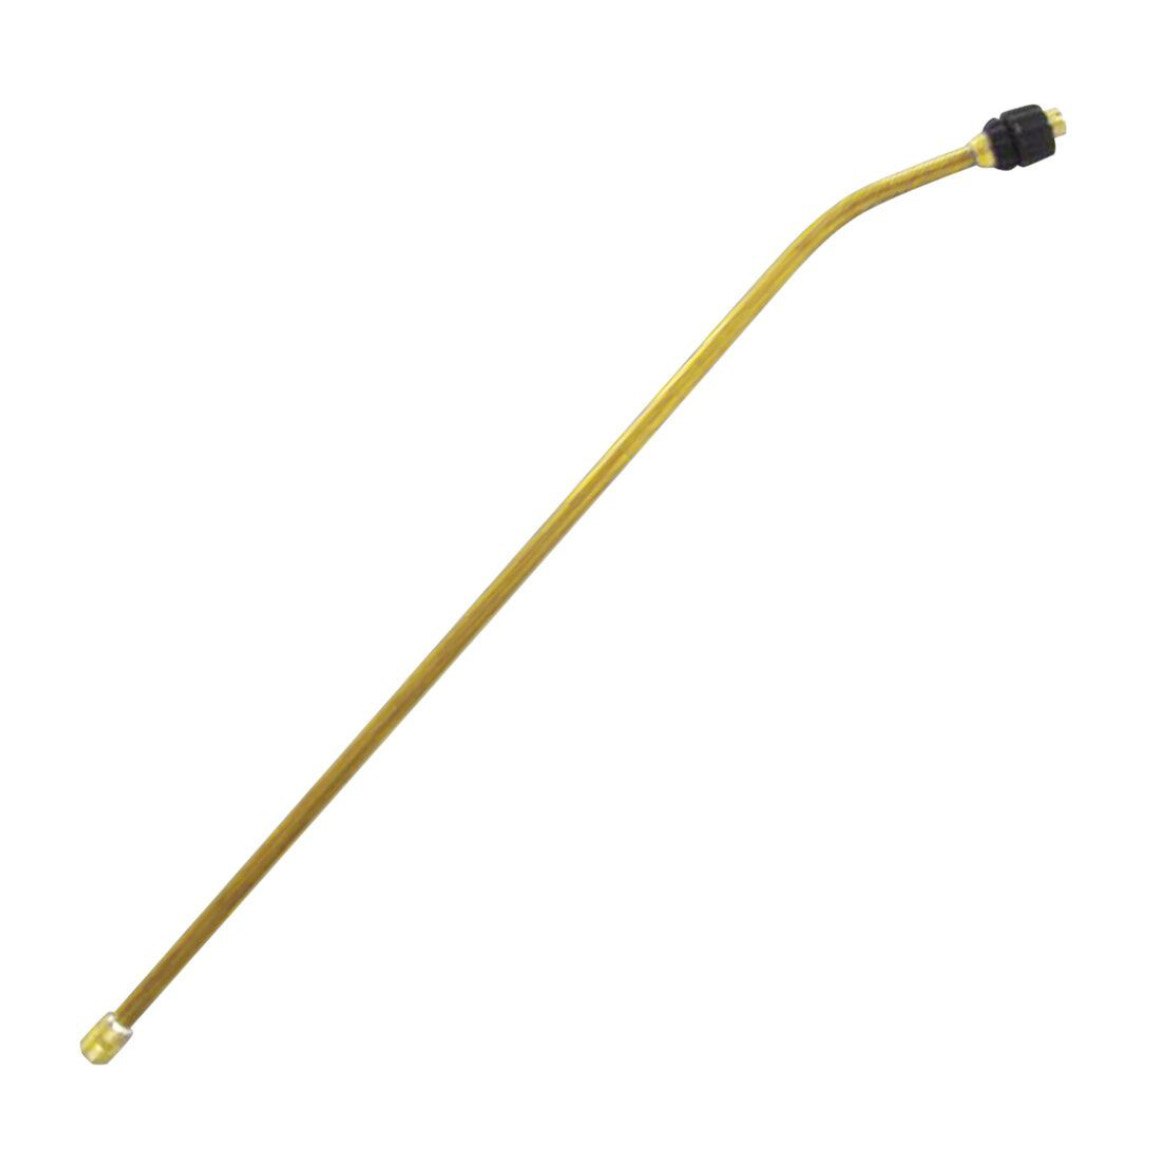 Mesto Spray Wand 3655 Flat Spray Nozzle. Mesto Sprayer spare part and accessory is made from brass and has a curved end. This lance which measures 50cm in length comes complete with a flat spray plastic and brass spray nozzle which produces a flat jet rec